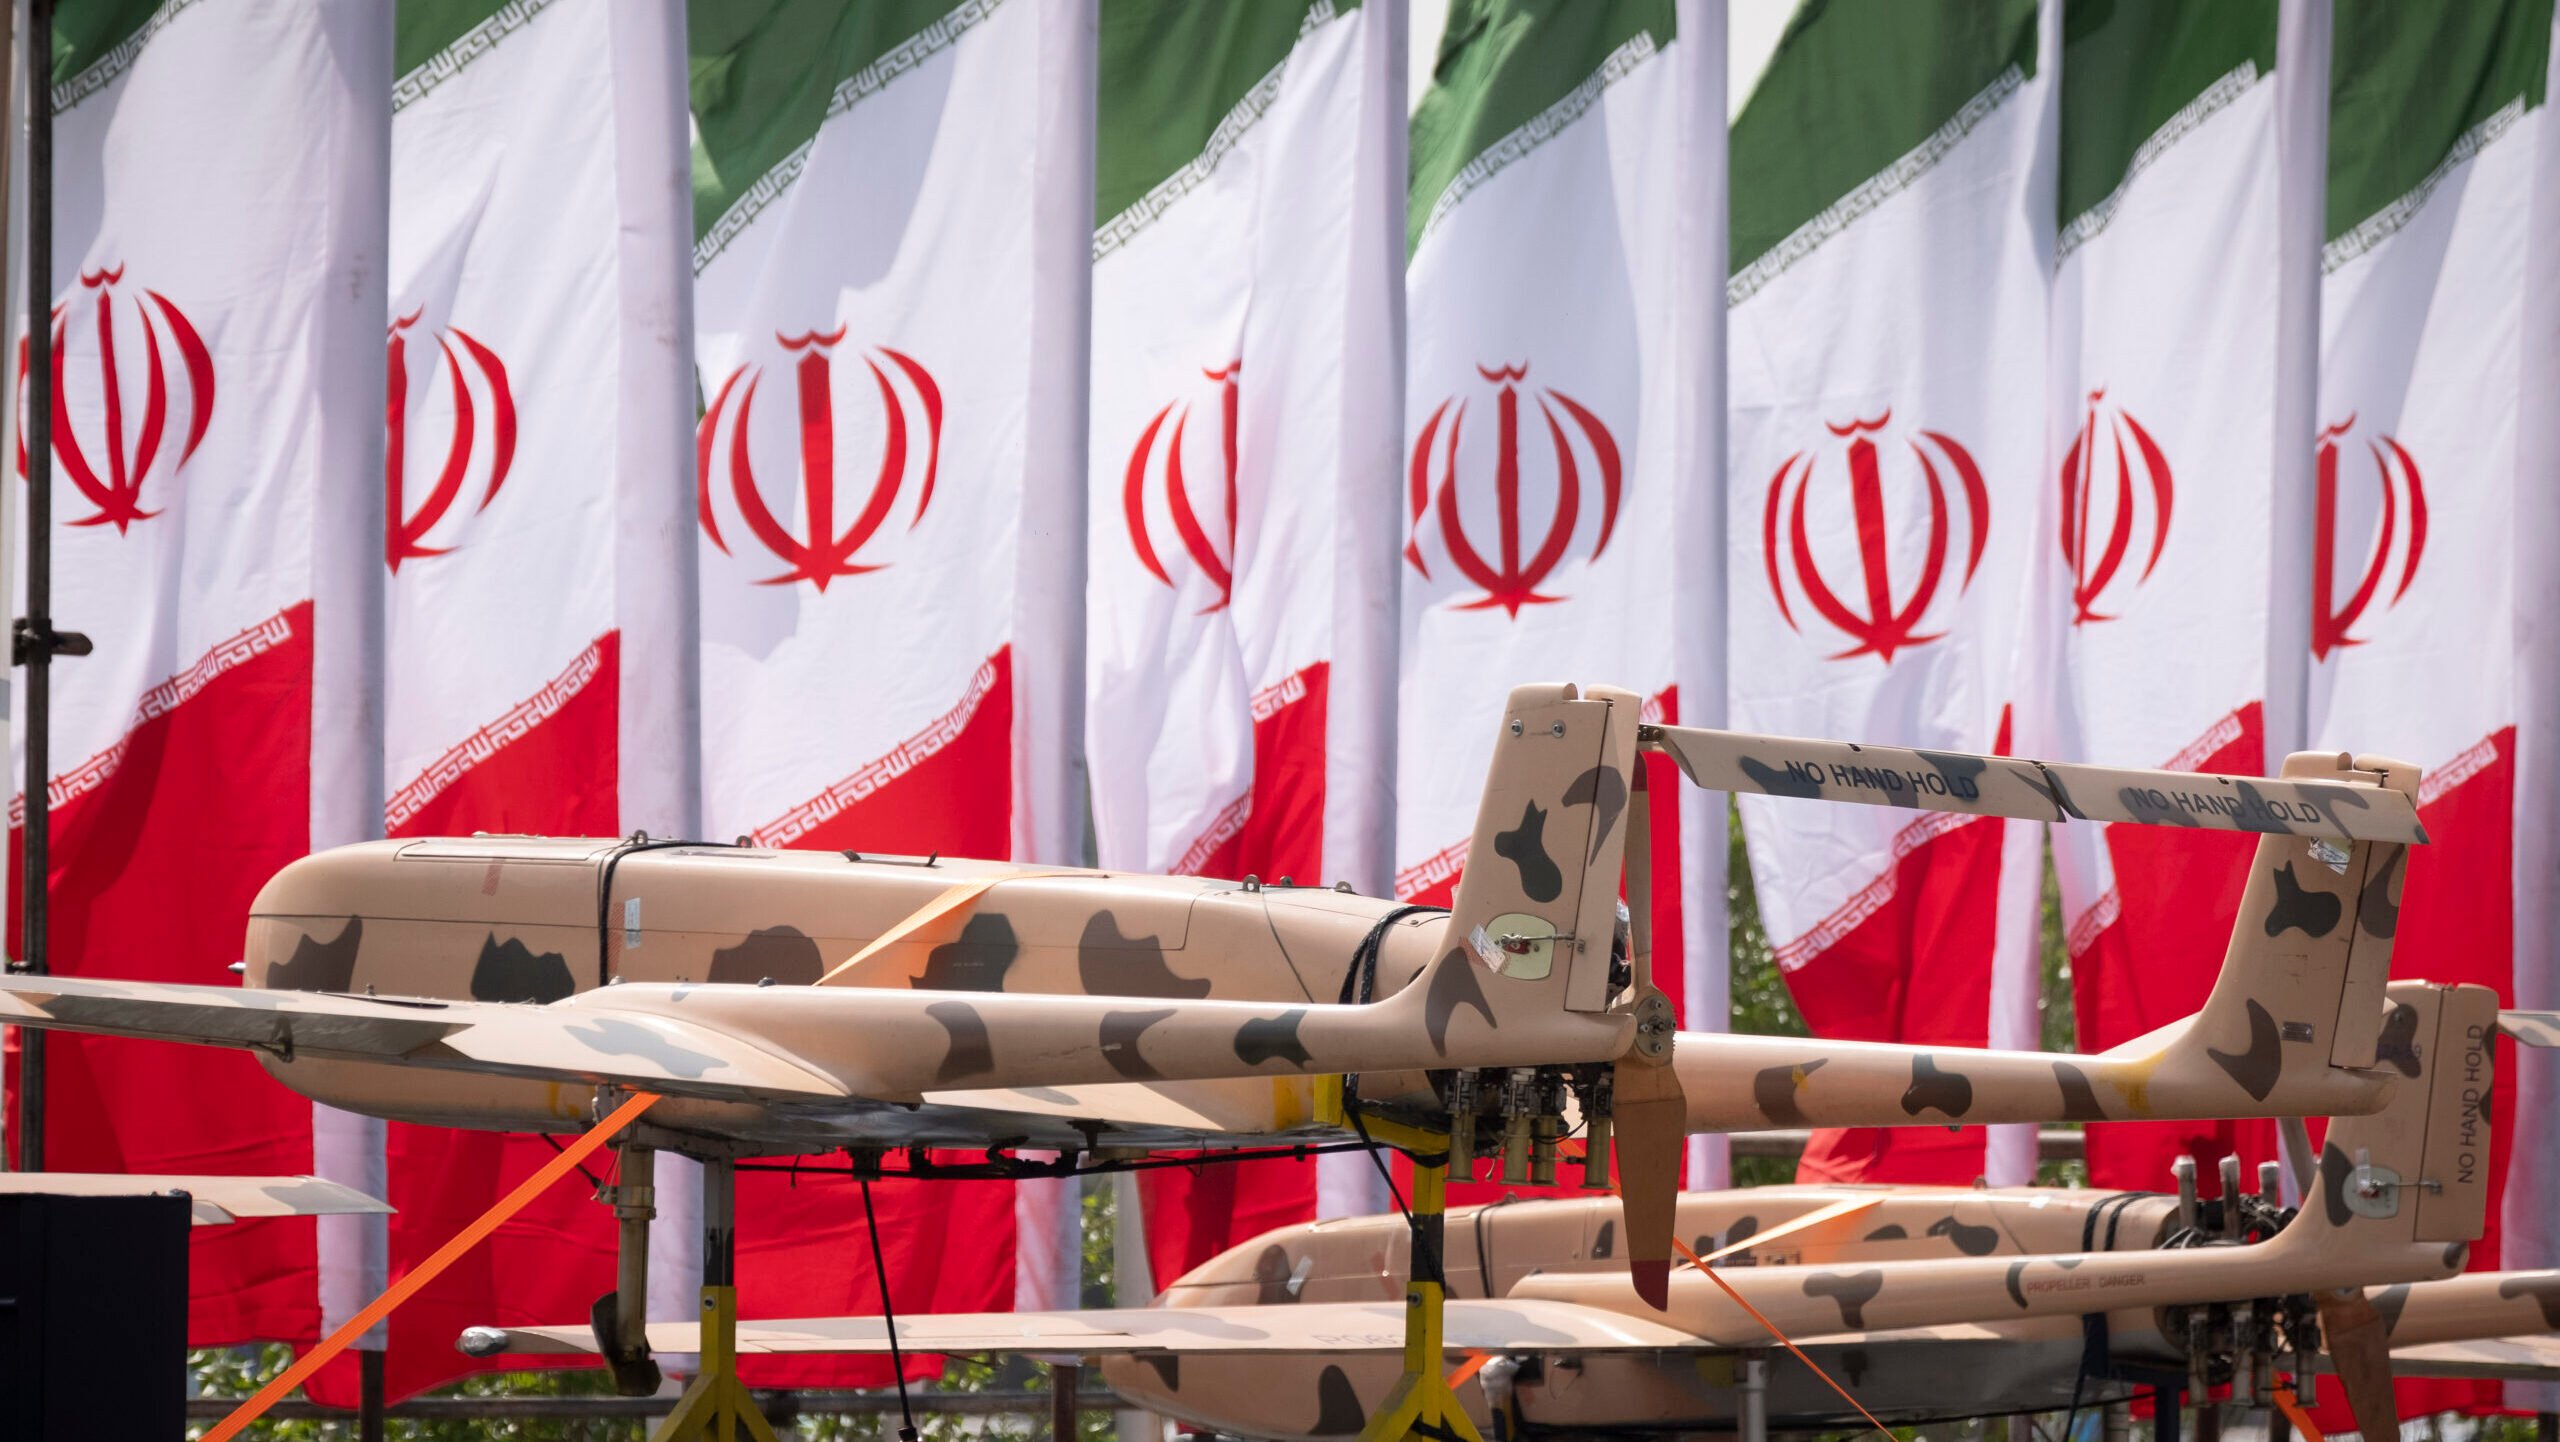 Iran’s strikes did little damage to Israel — but analysts say Tehran benefits anyway